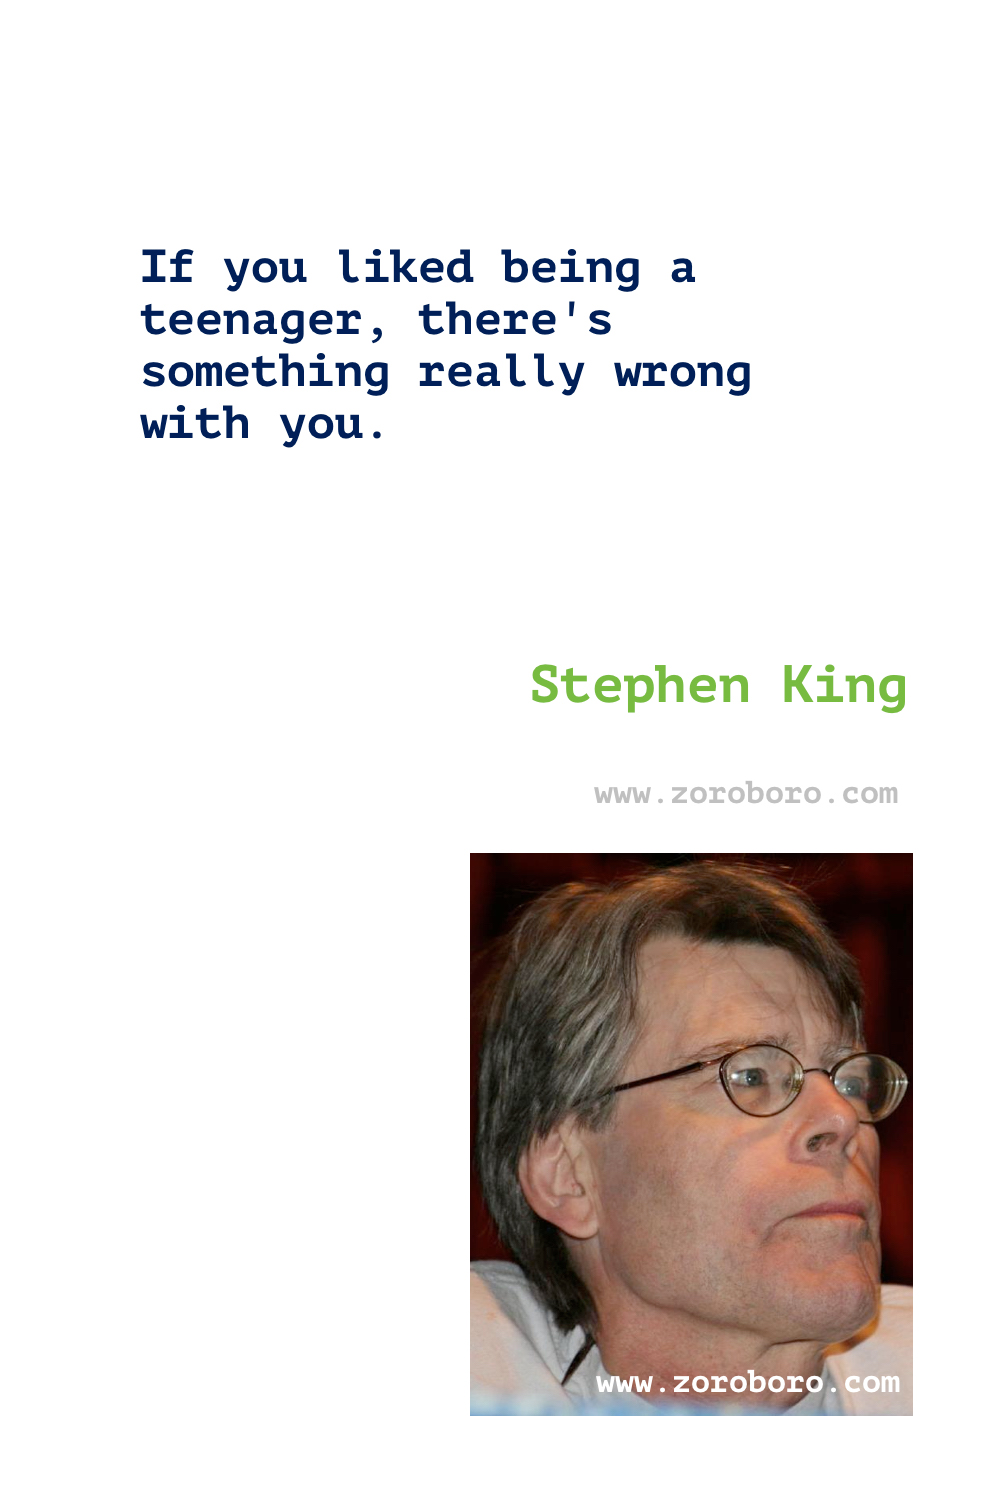 Stephen King Quotes. Stephen King Books Novels Quotes. Stephen King Movies. Stephen King Writing. Stephen King Inspirational Quotes    The Stand, The Shawshank Redemption, Pet Sematary 1989, Carrie 1976, The Green Mile, The Dark Tower & On Writing: A Memoir of the Craft Quotes